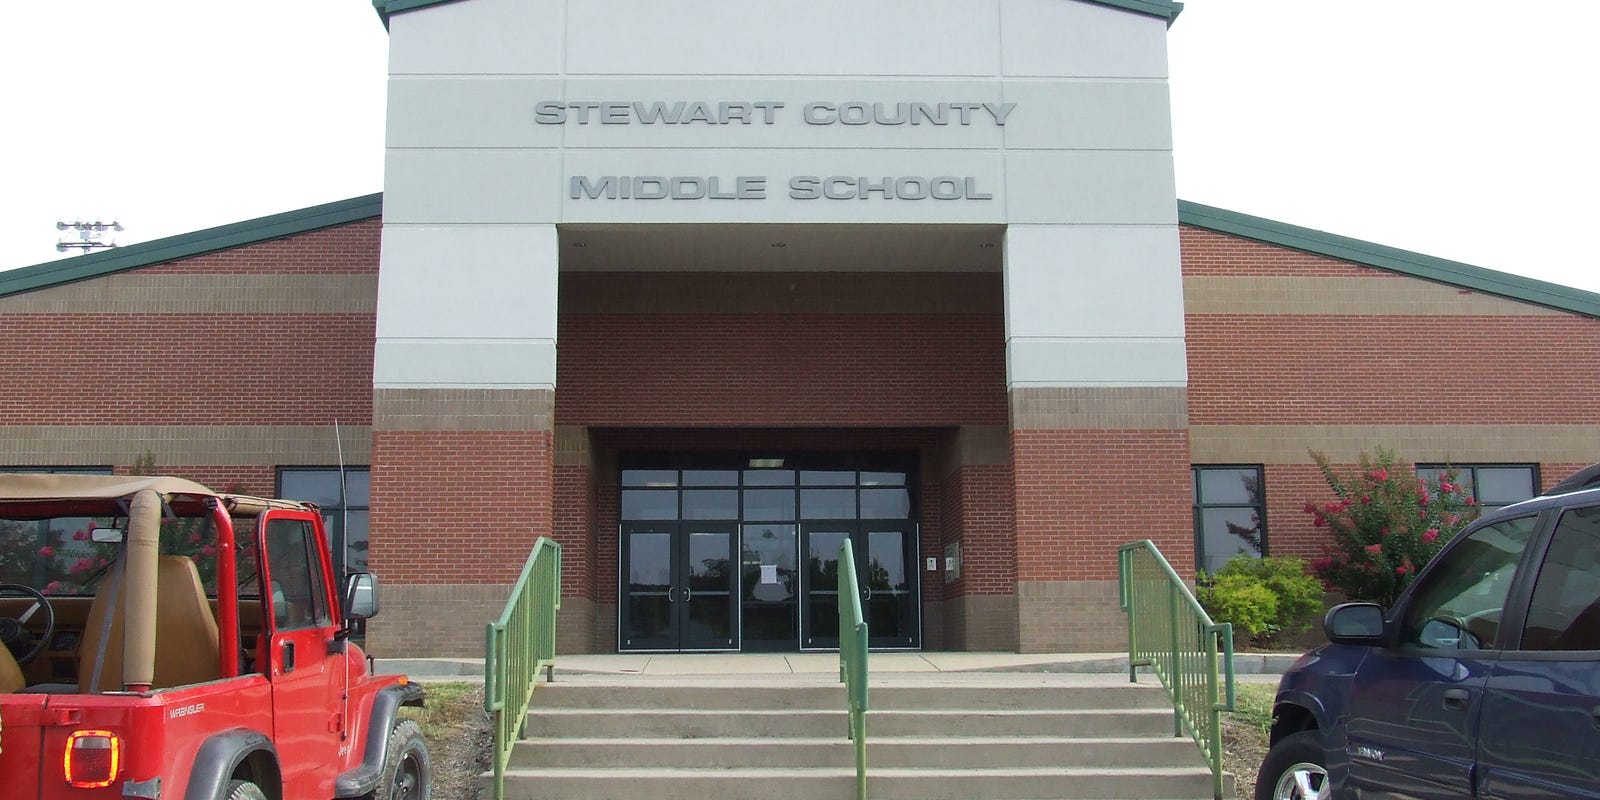 Stewart County schools closed for week due to illness